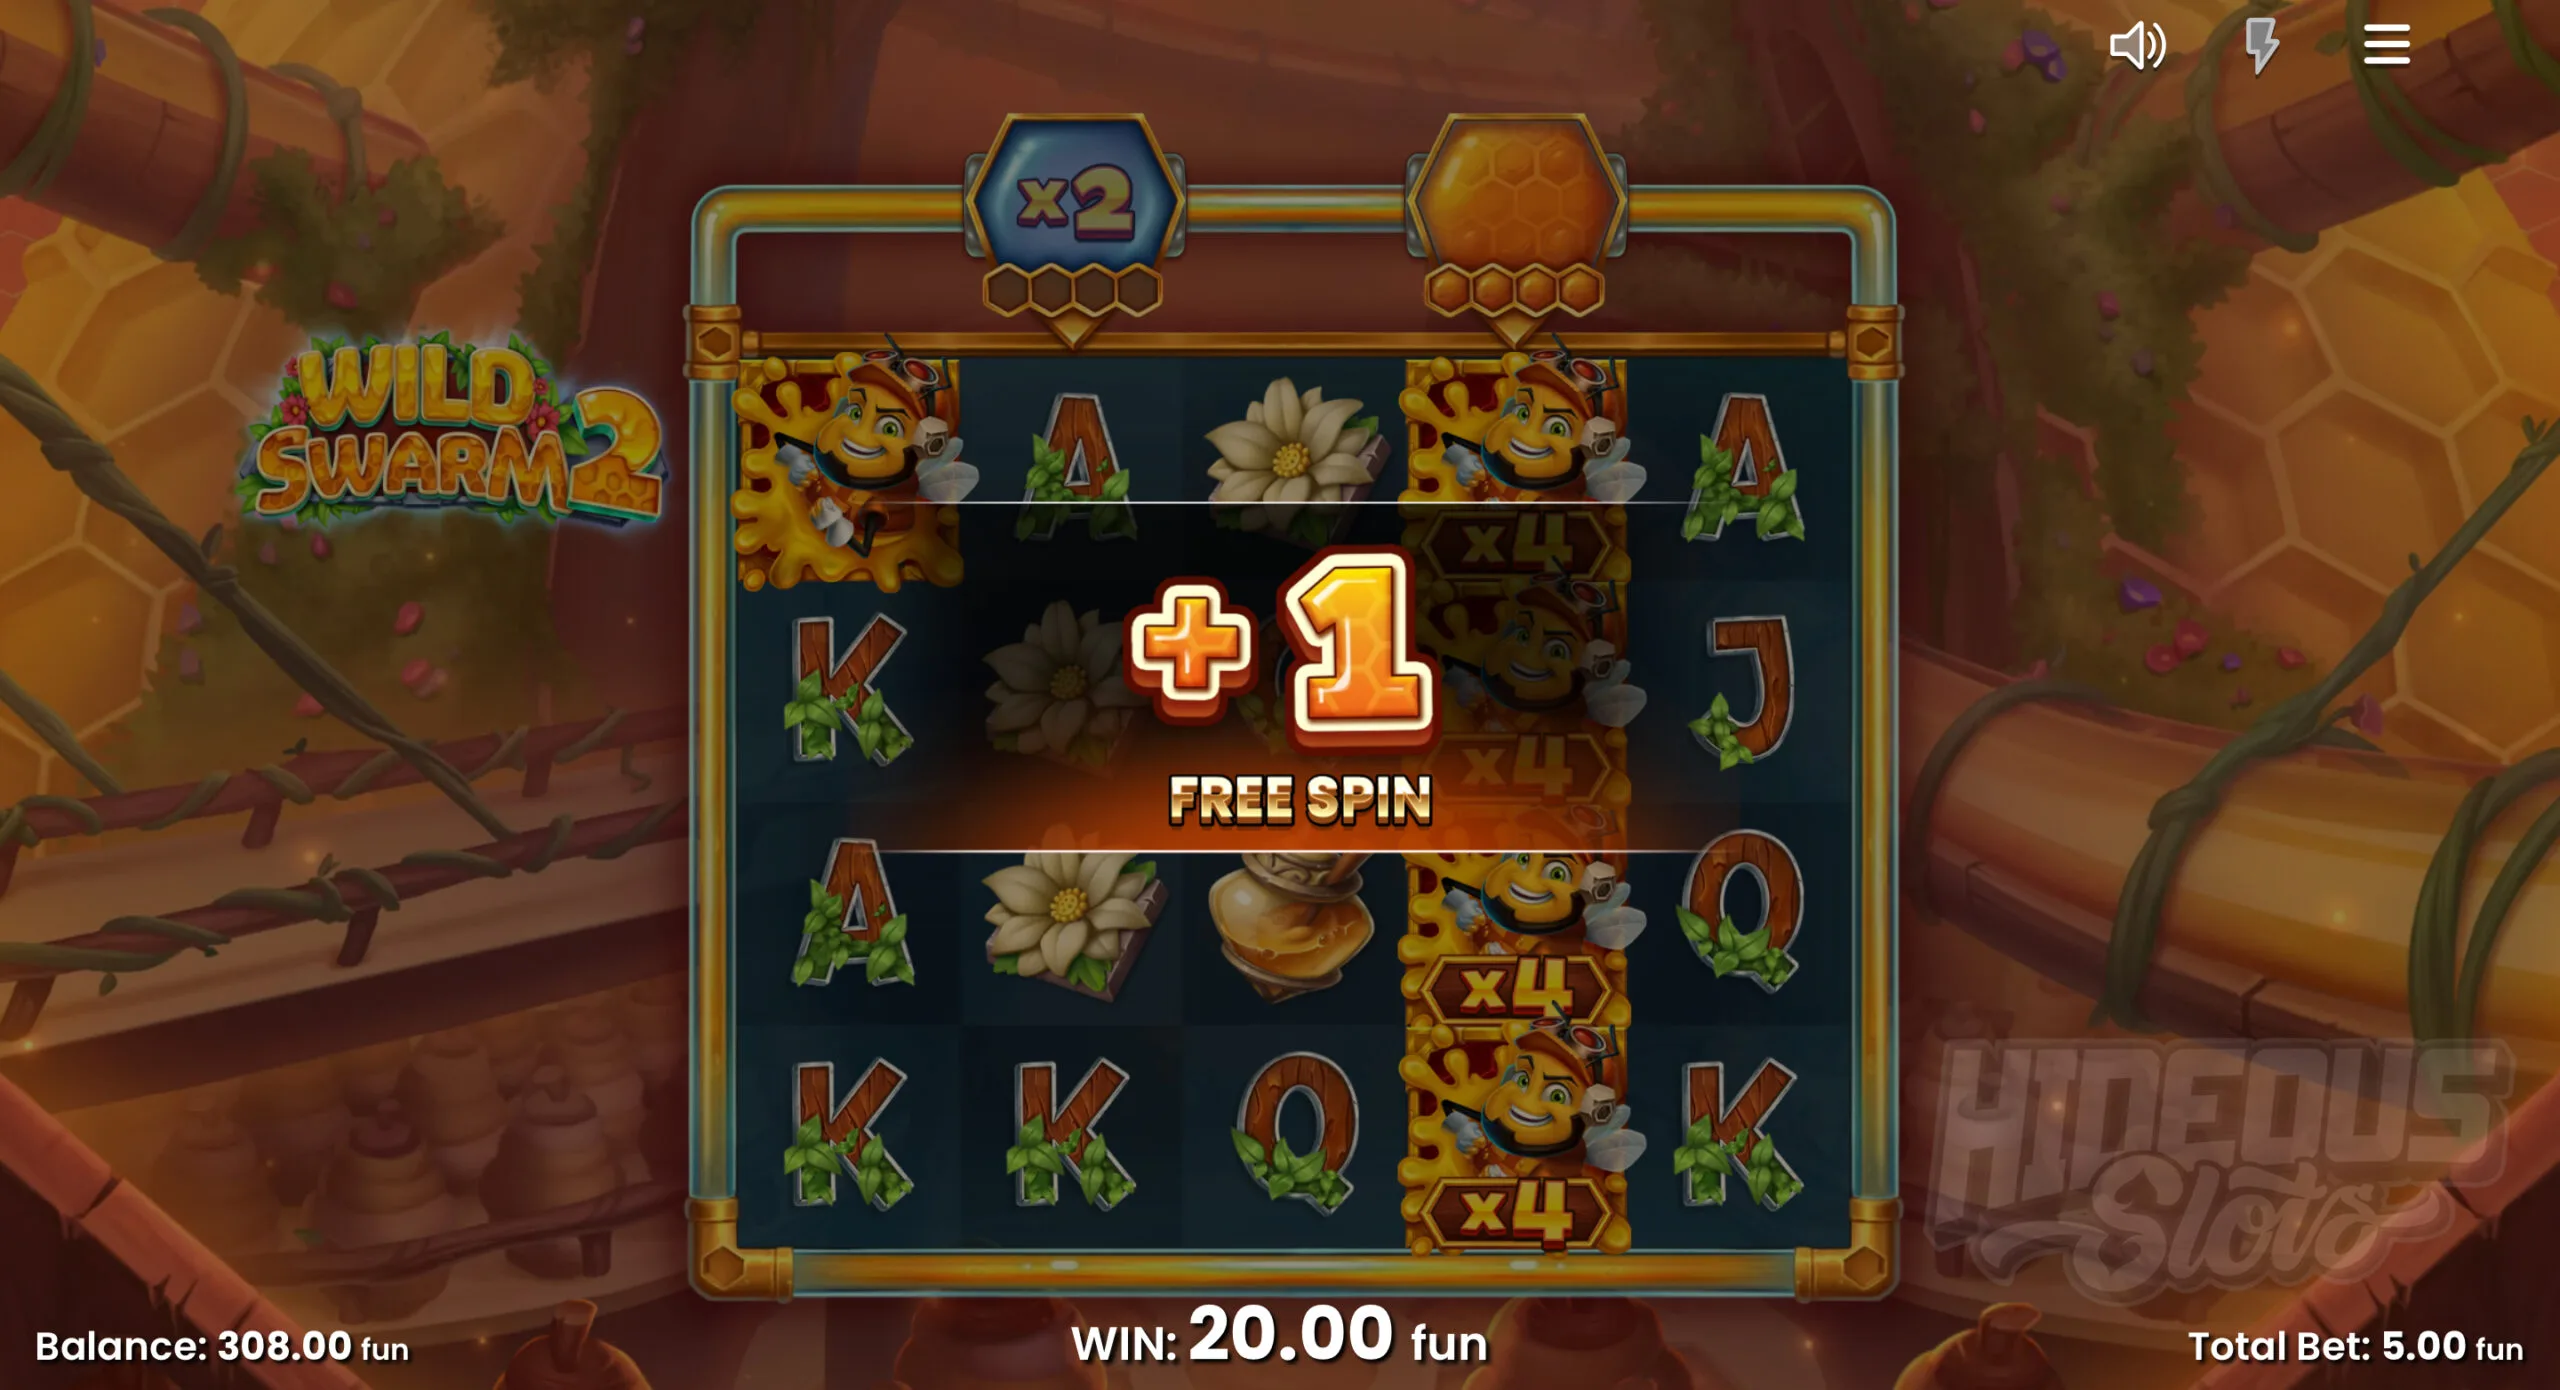 Filling a Multiplier Reel With Sticky Wilds Will Award +1 Spins